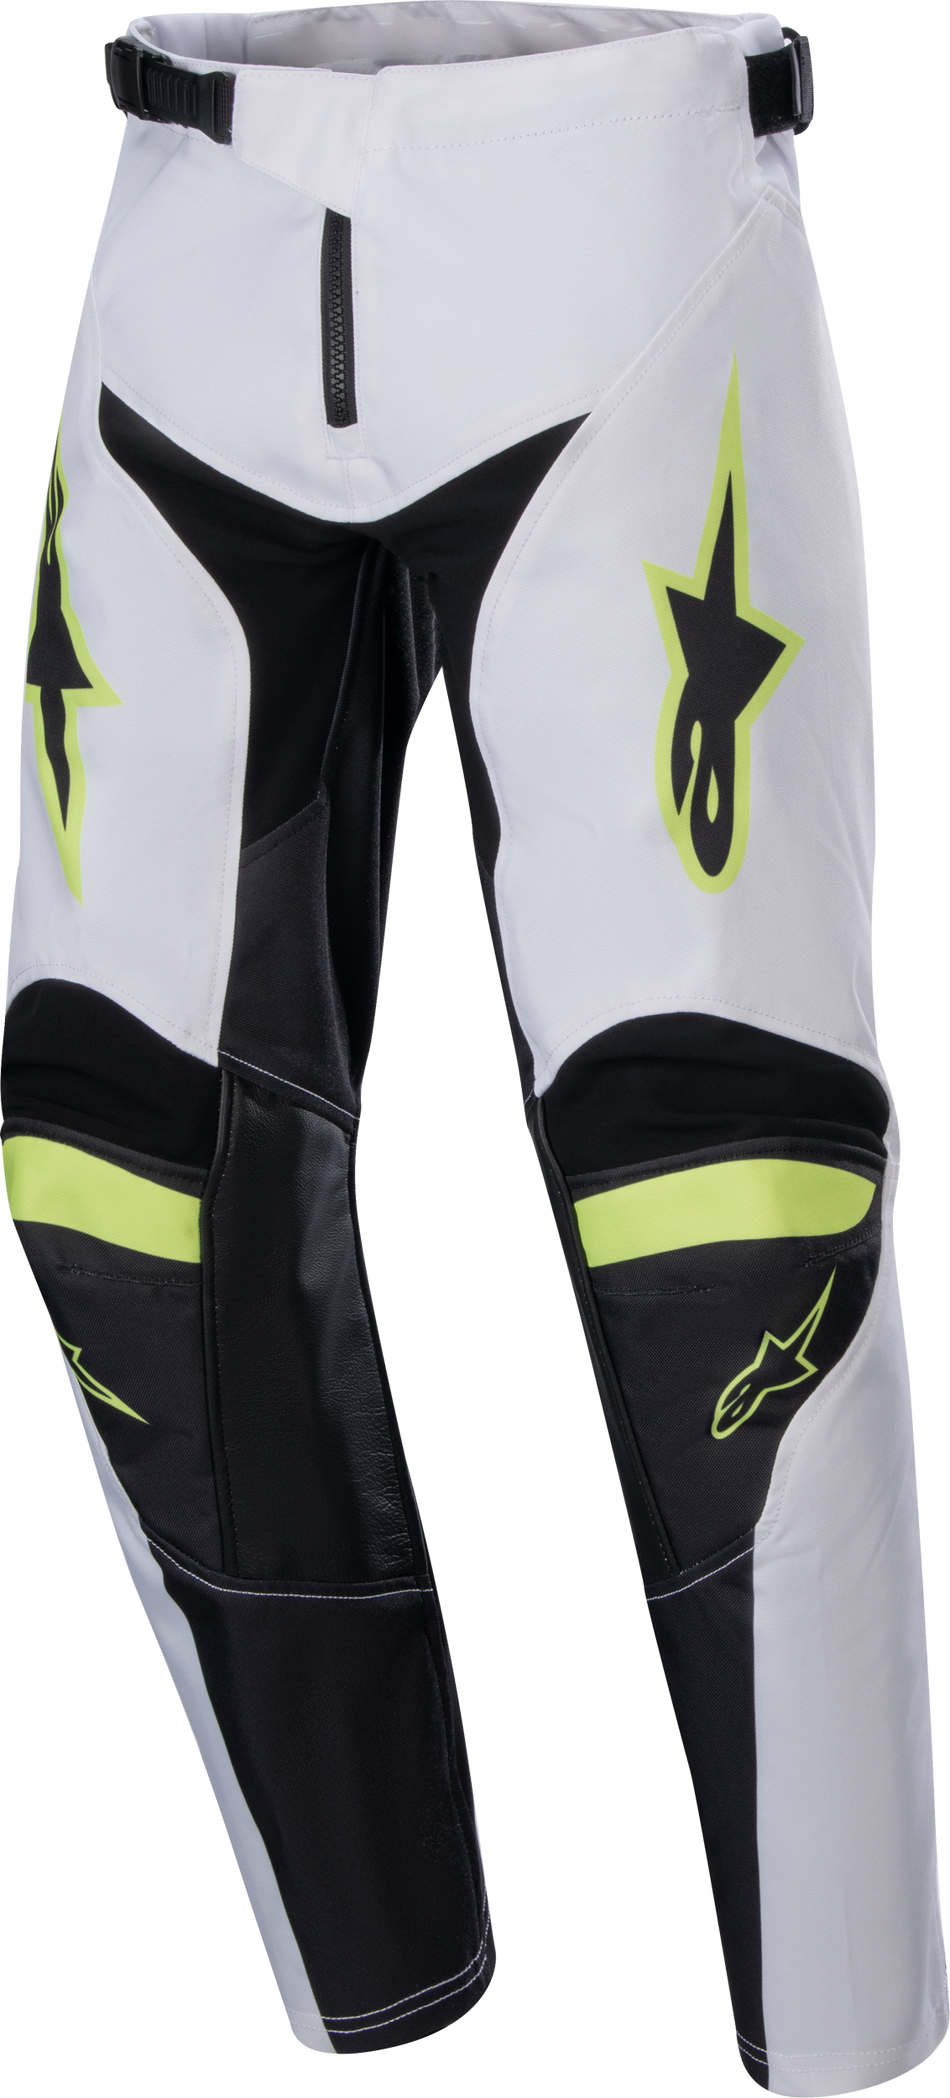 ALPINESTARS Youth Racer Lucent Pants Wht/Neon Rd/Ylw Fluo Sz 22 3743724-2029-22